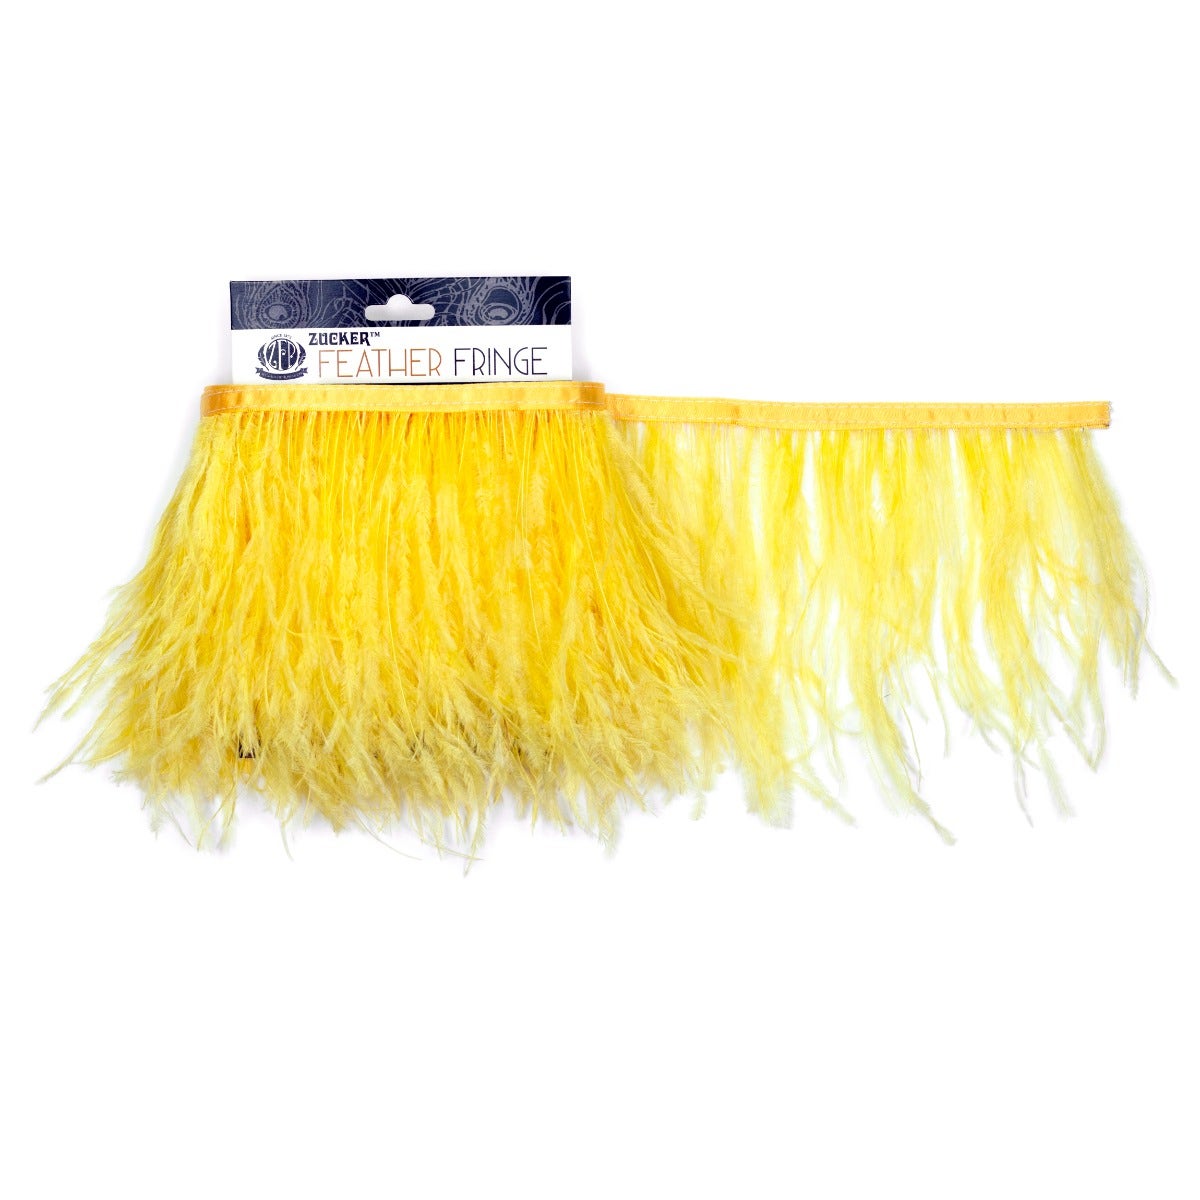 One-Ply Ostrich Feather Fringe - 1 Yard - Pineapple